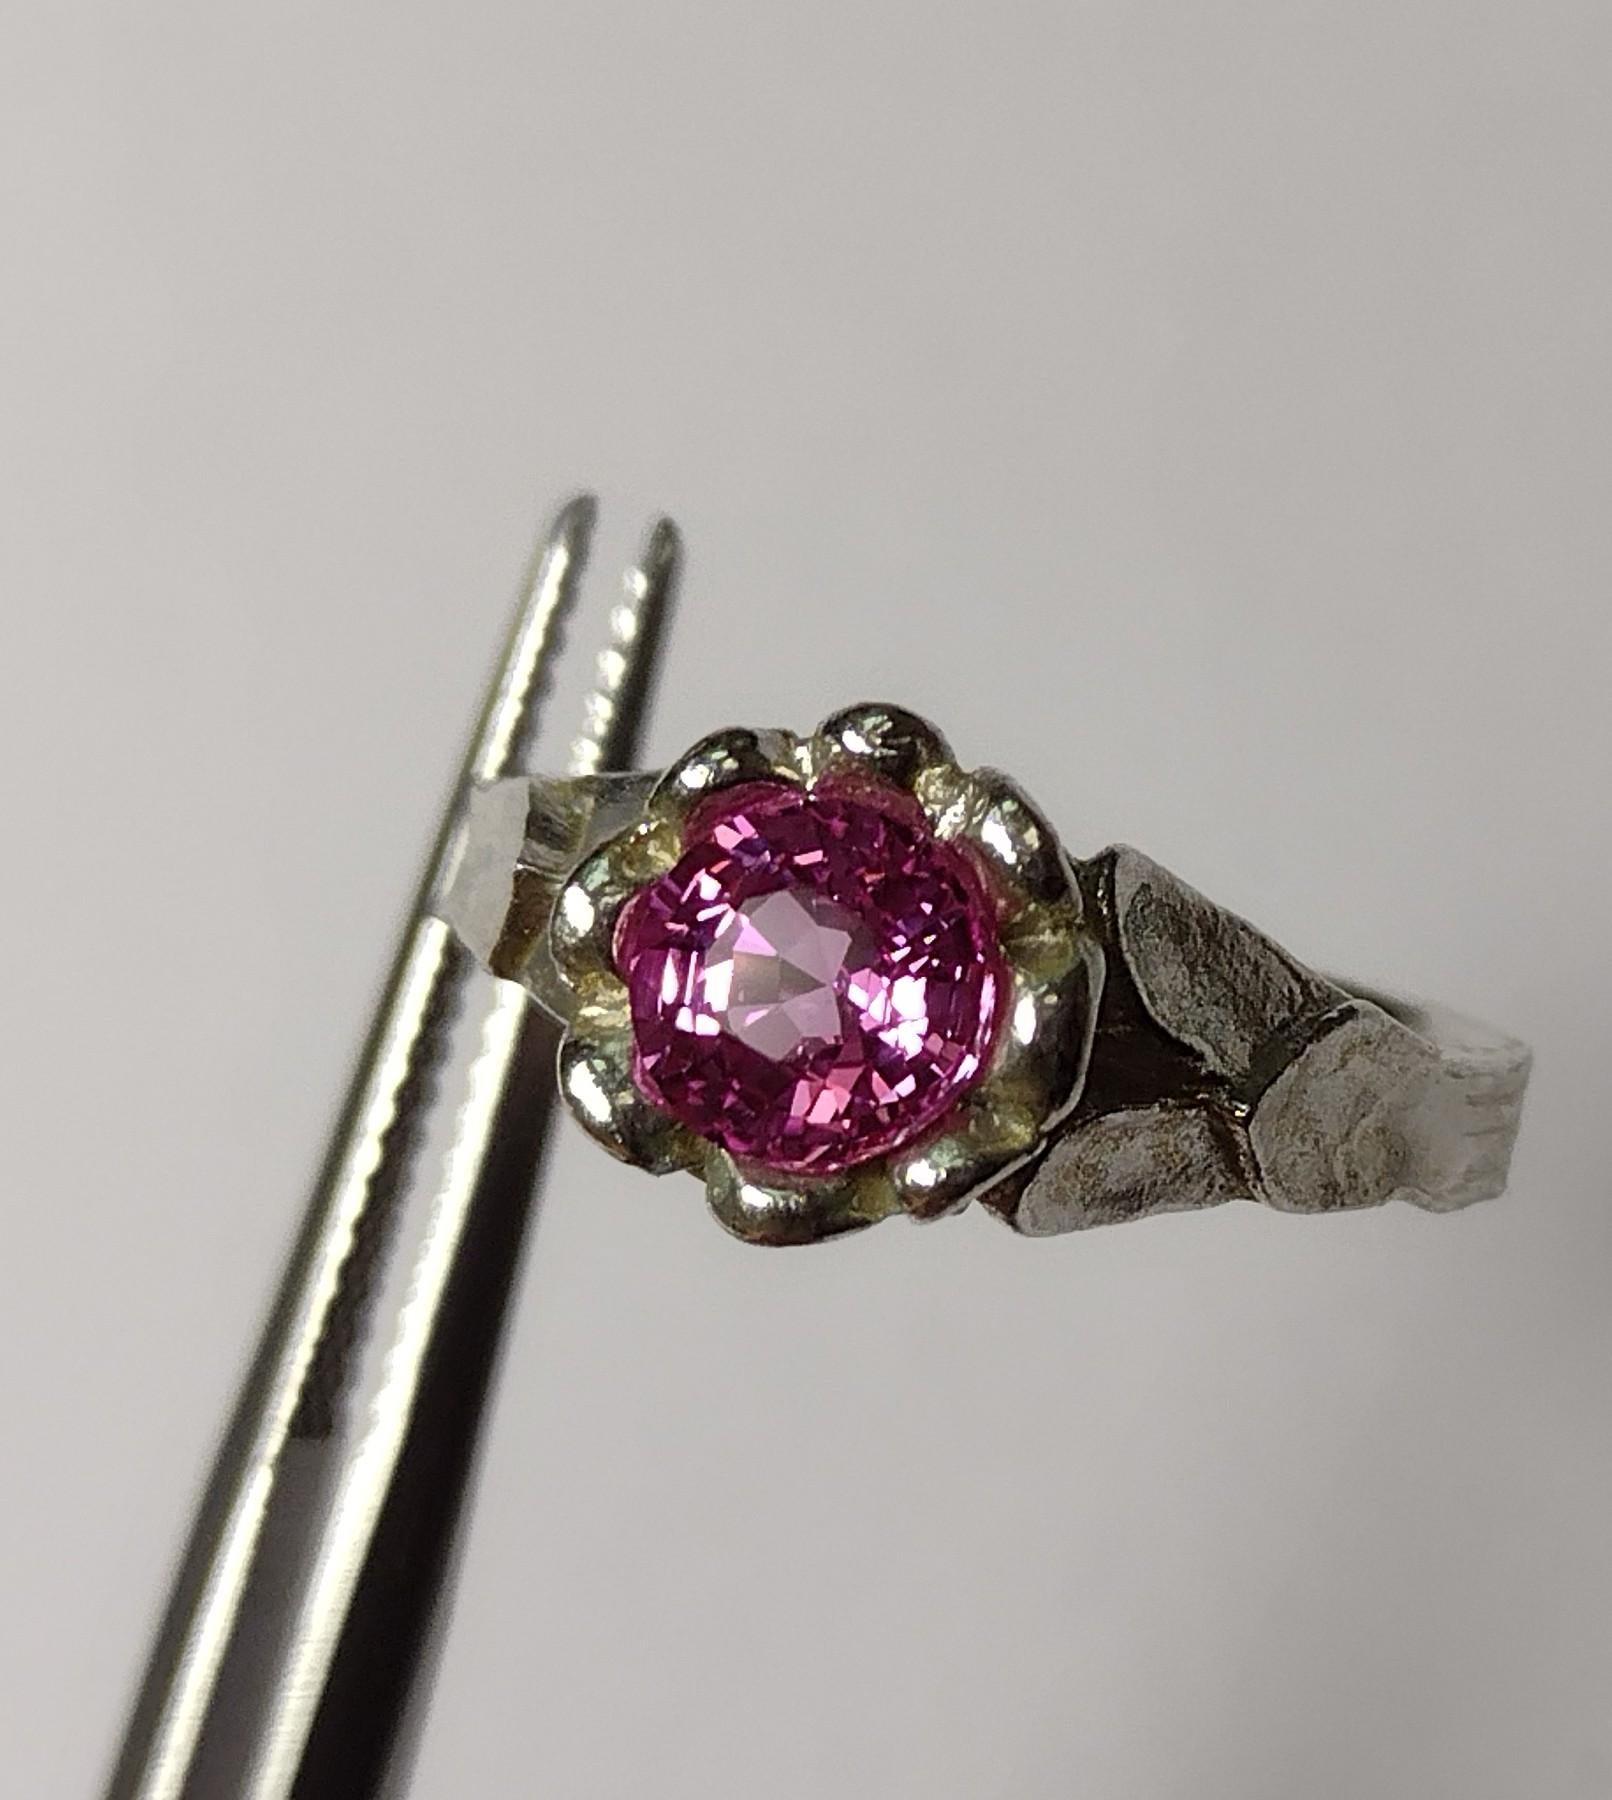 For Sale:  18 Karat Yellow Gold and Platinum Ceritfied Pink Sapphire 1.18 Carat Tulip Ring 9